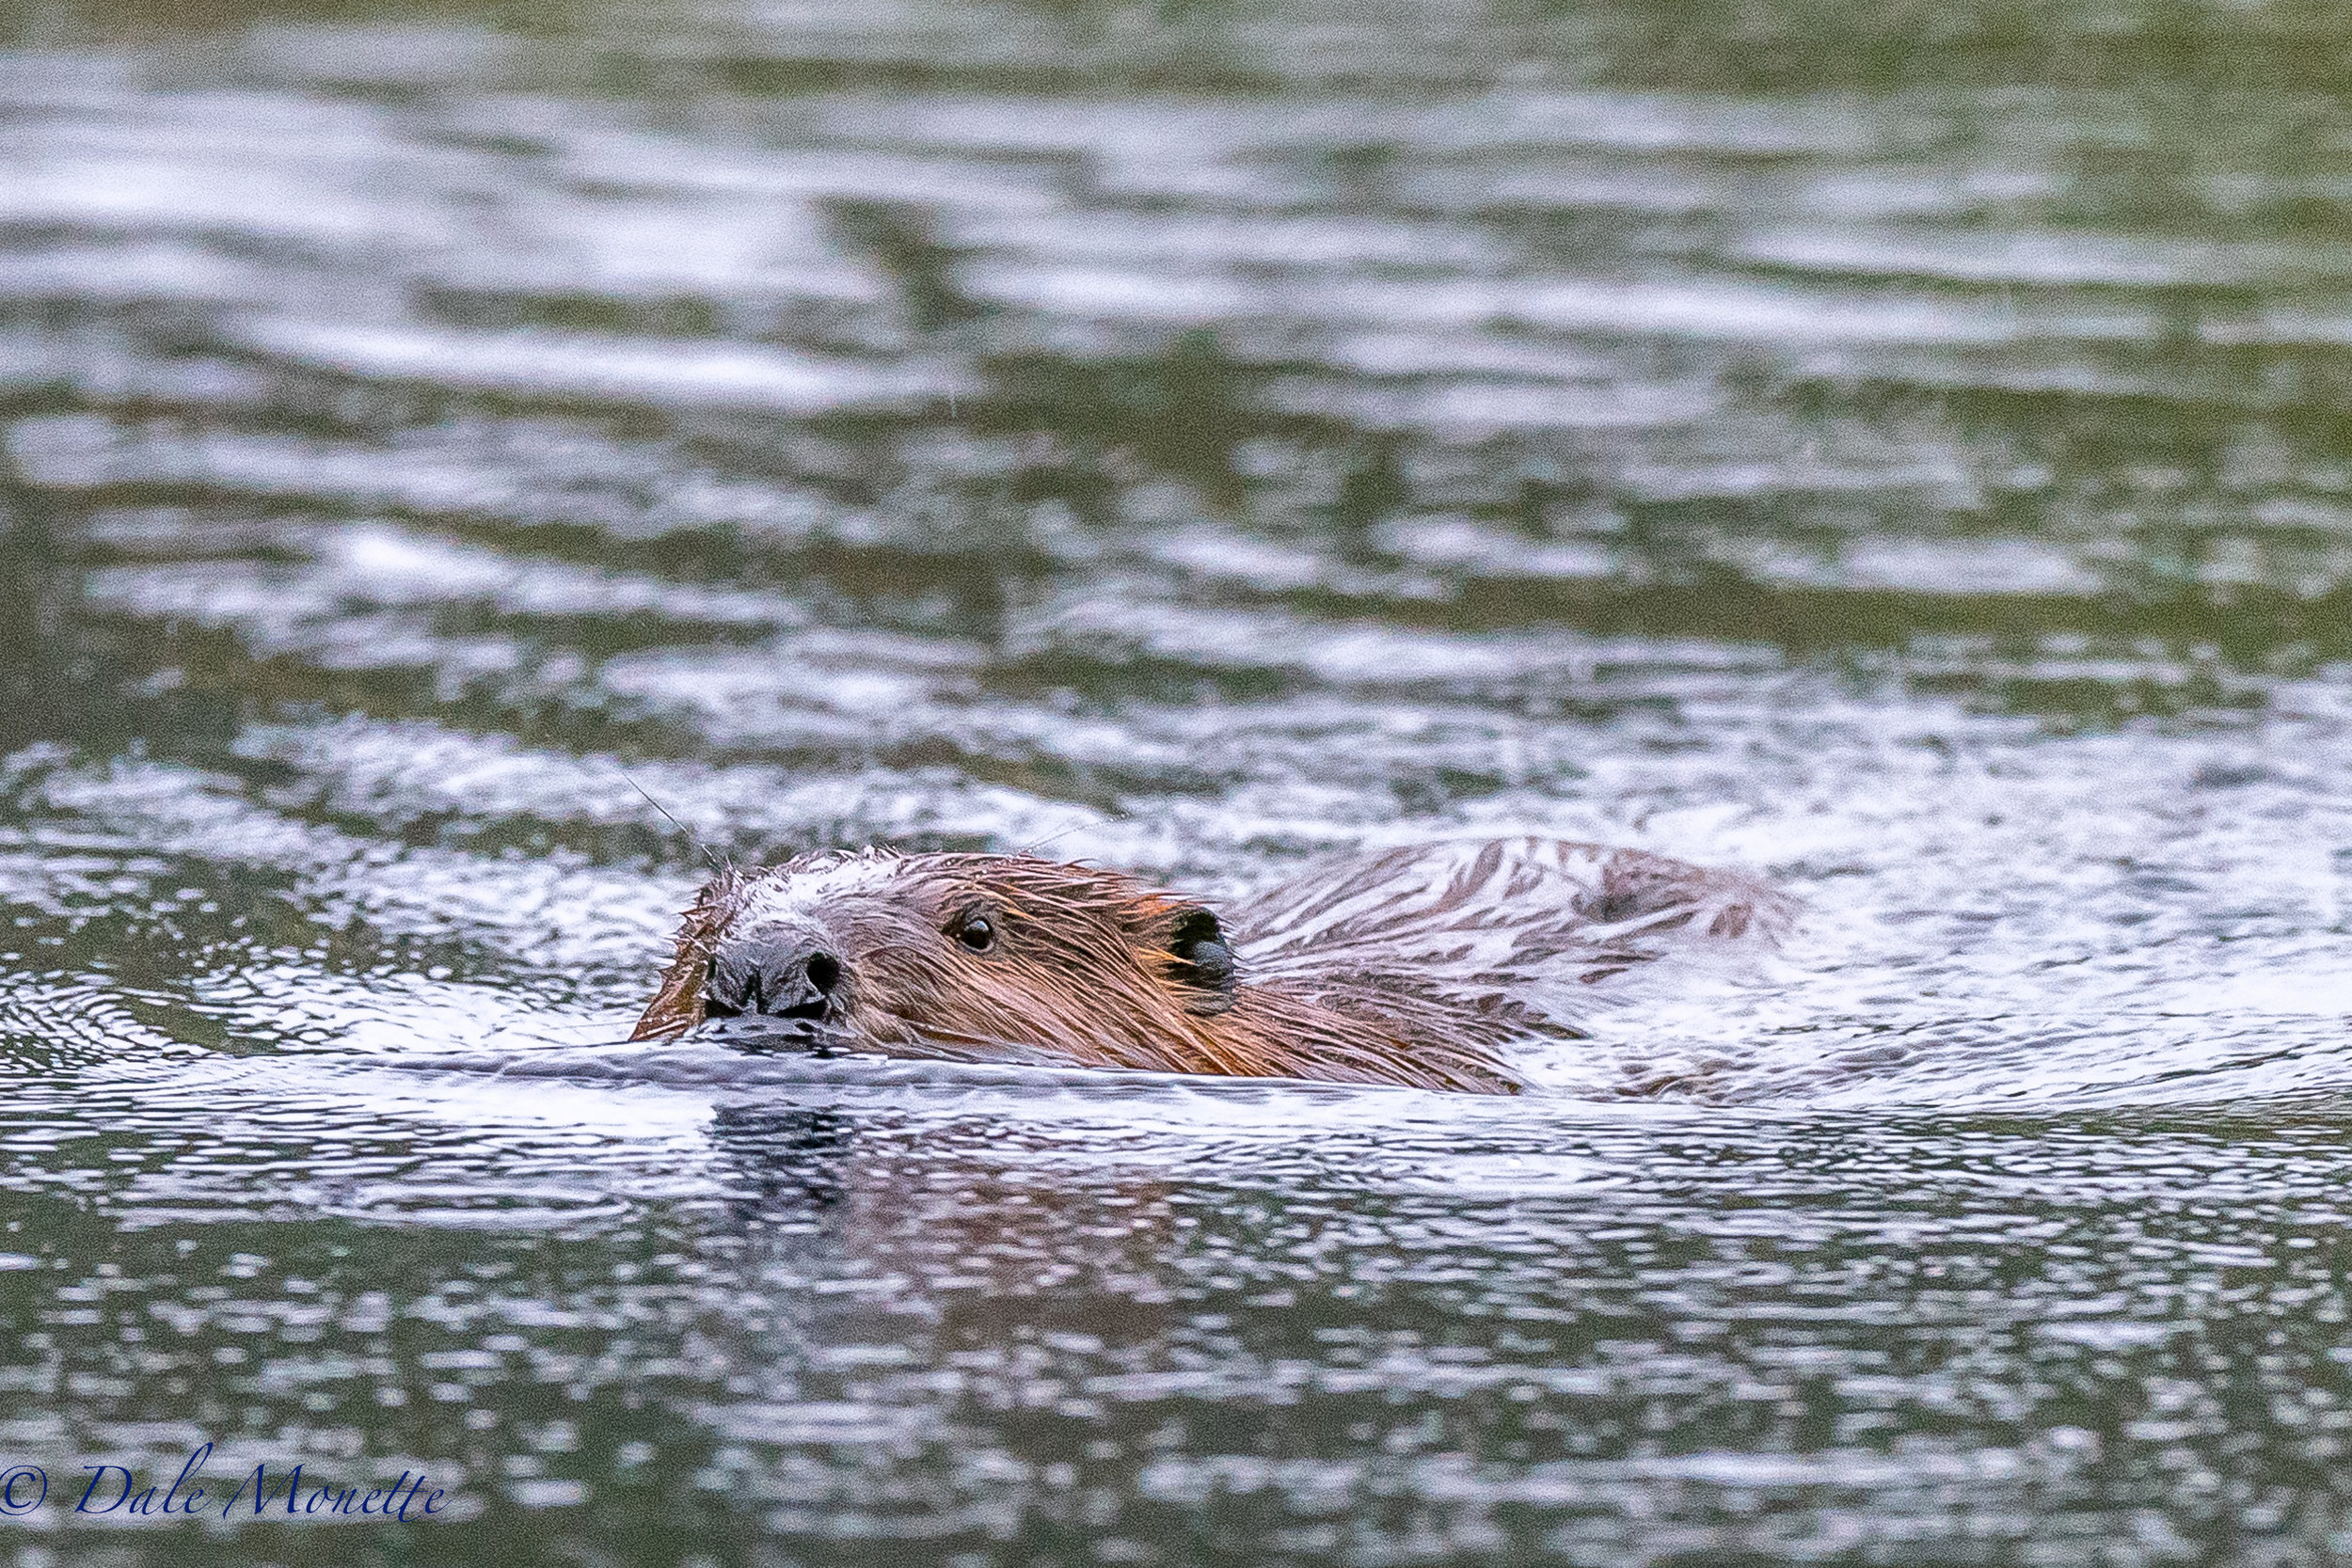   I spent the morning on the side of a beaver pond in the rain. I was surprised when this adult beaver steamed right by me, within 20 feet, looked at me and never gave me the tail slap! It just kept going along on its mission... &nbsp;4/26/17  